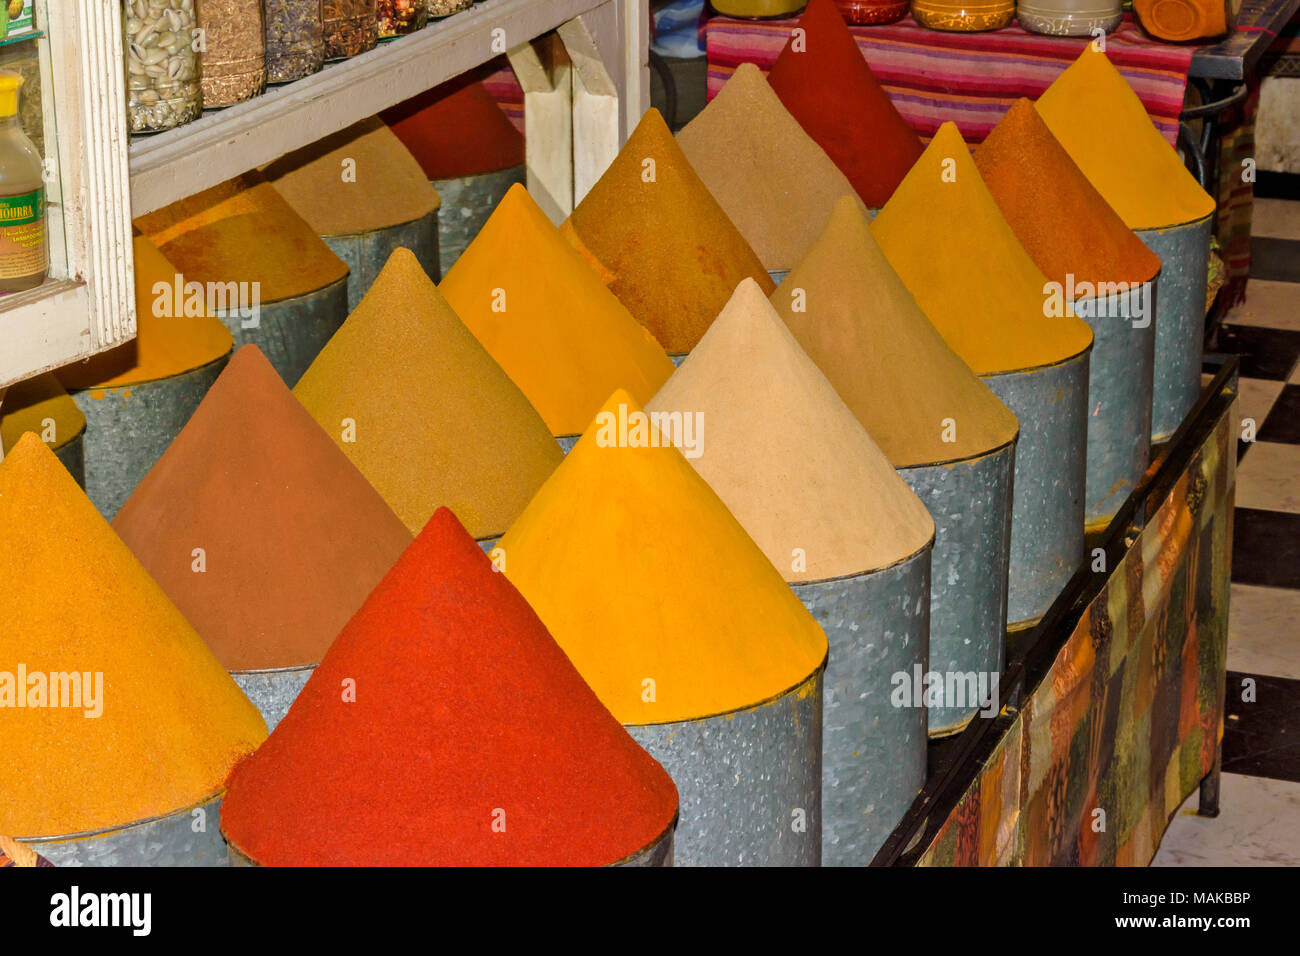 MOROCCO MARRAKECH JEMAA EL FNA MEDINA SOUK COLOURED CONES OF SPICES WITHIN METAL CONTAINERS Stock Photo